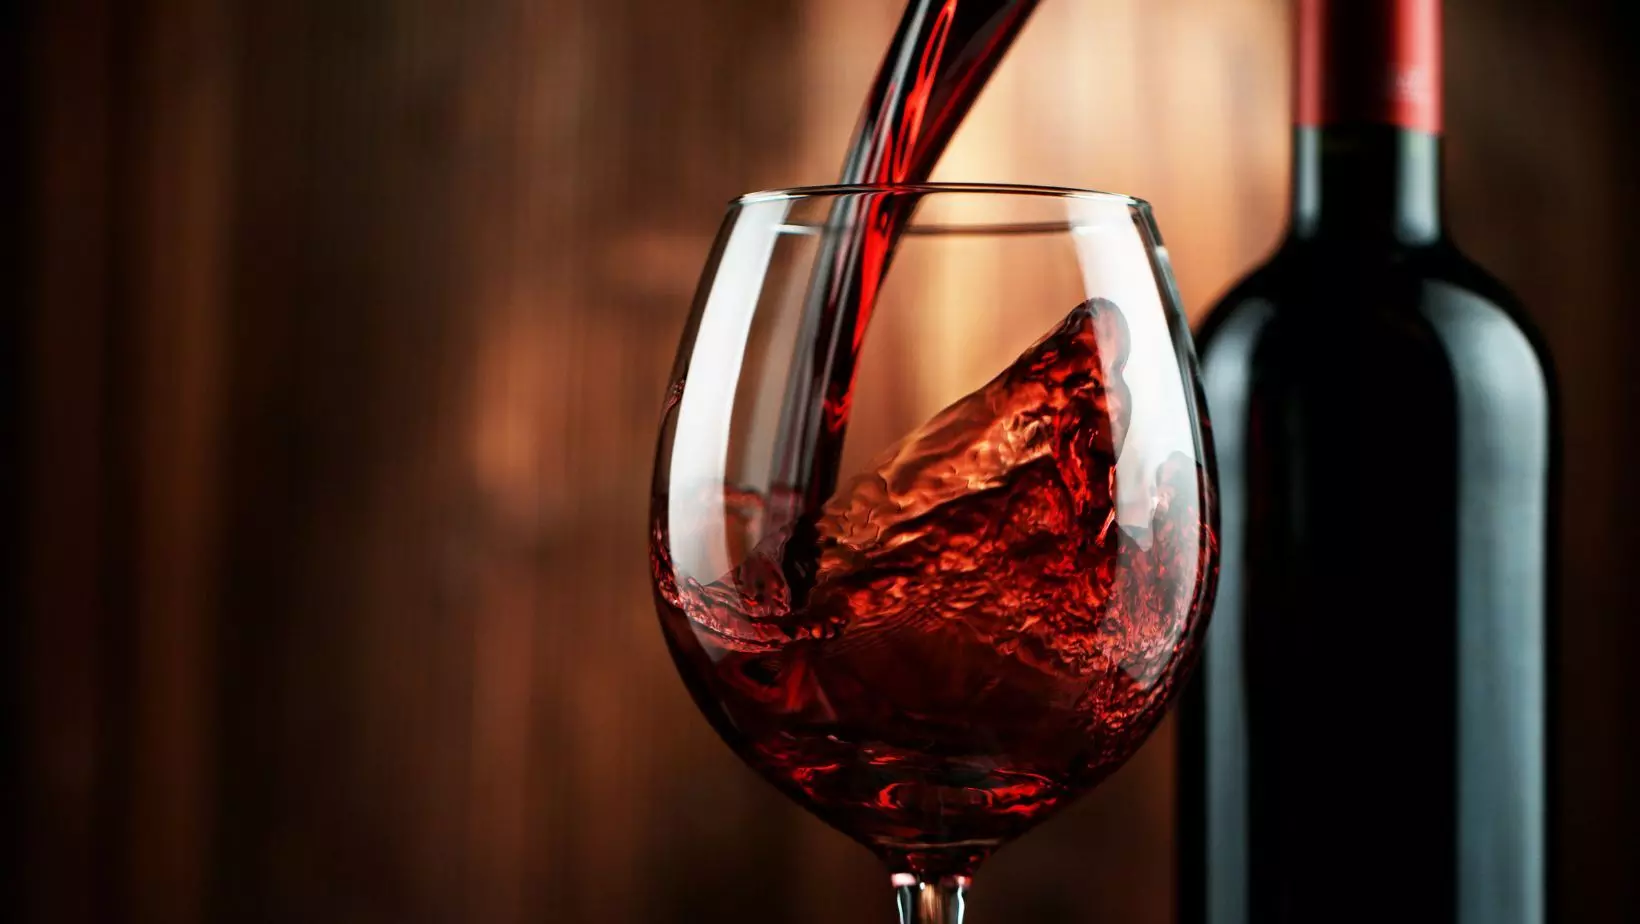 Busy in making wine for Christmas? If its illegal, then fines and imprisonment